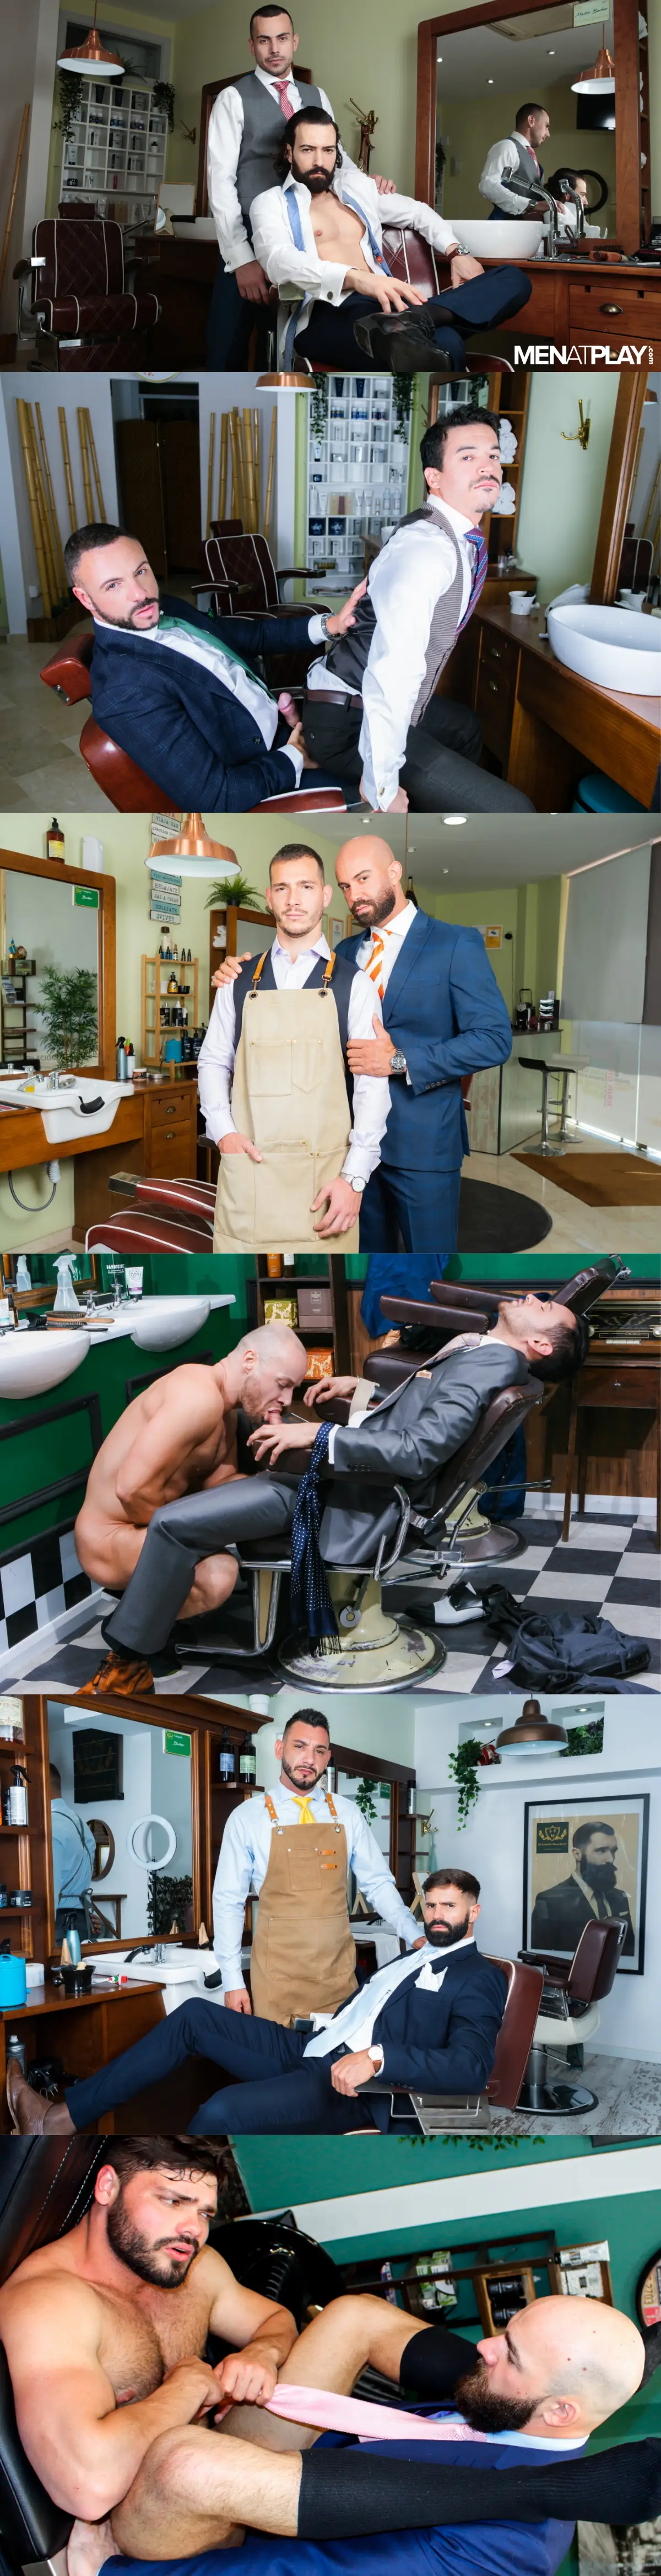 Barbers In Suit - Men At Play's Compilation